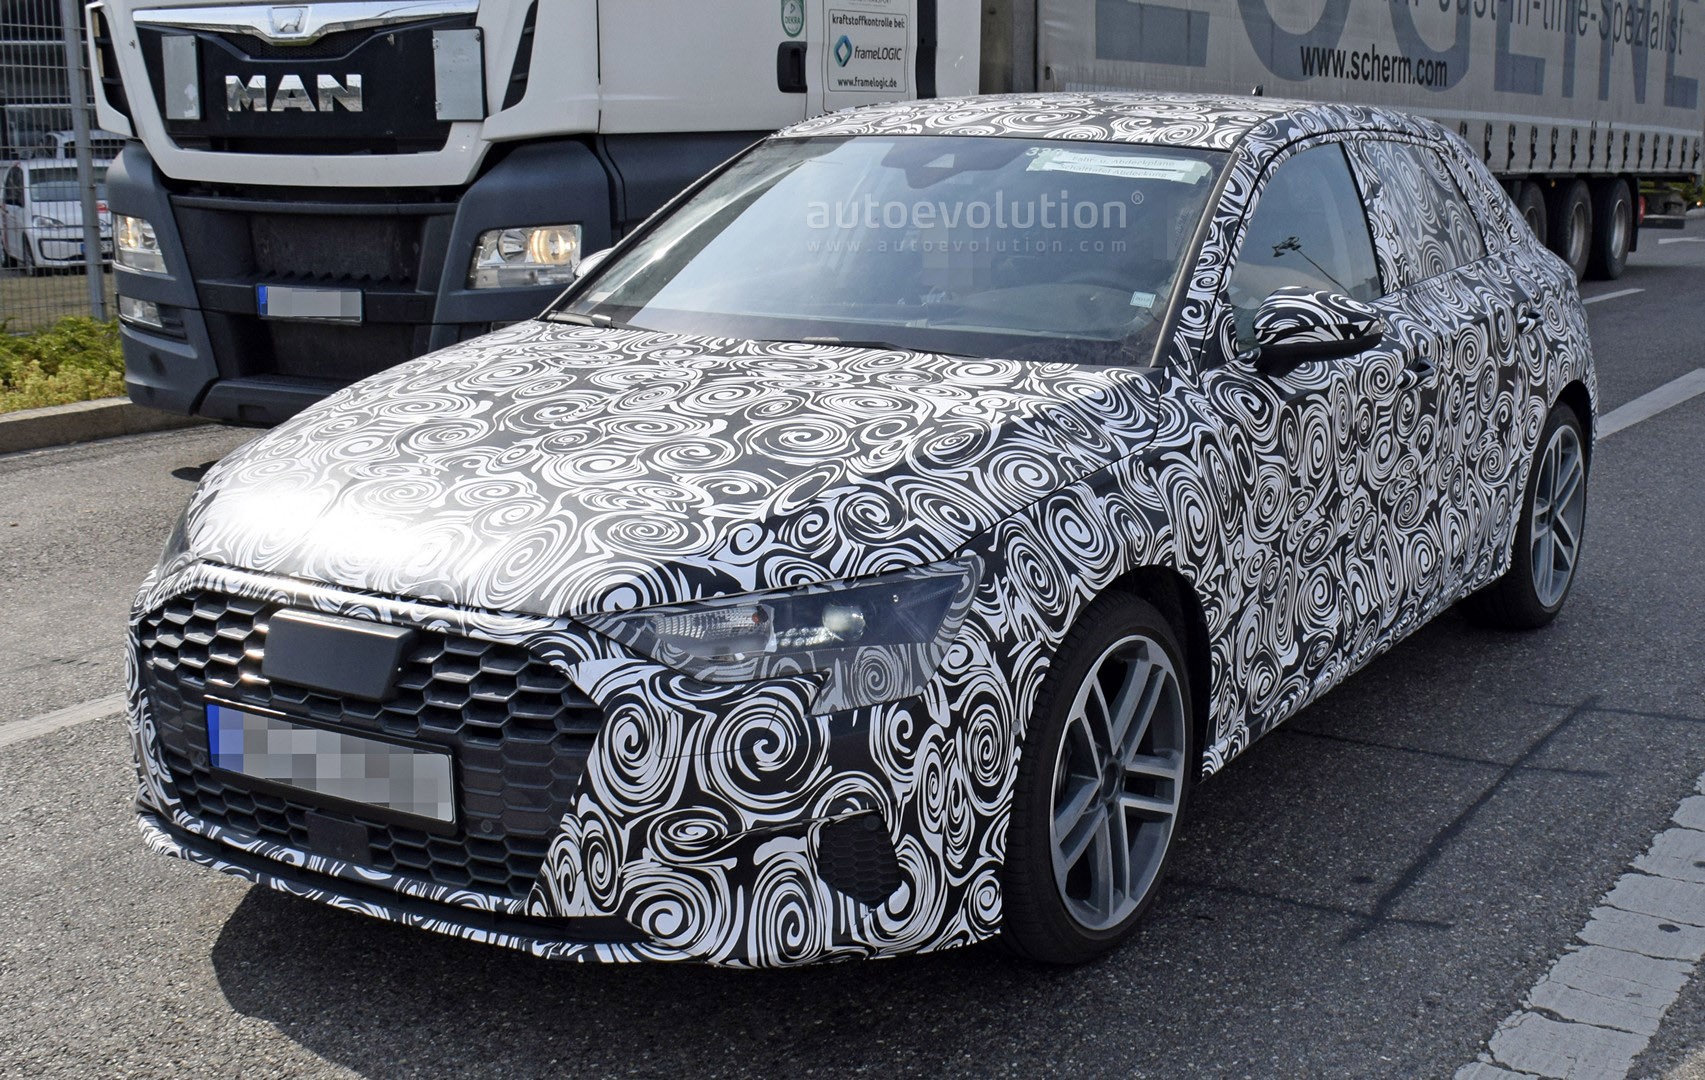 2020 Audi A3 Shows Huge Hexagonal Grille on Long Nose ...